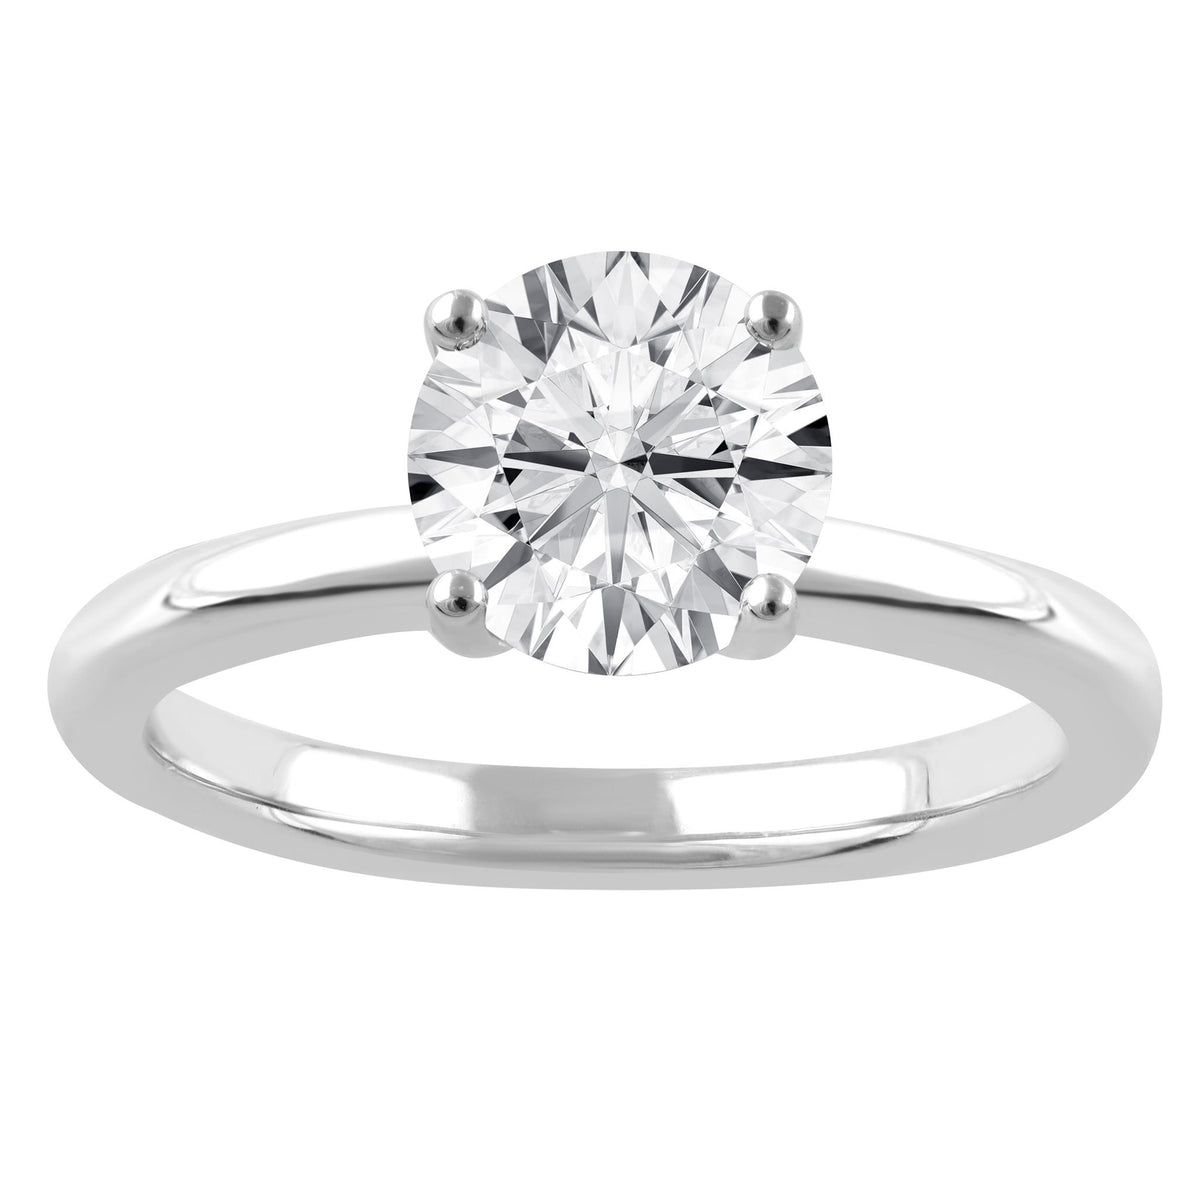 14Kt White Gold Solitaire Solitaire Ring With 1.50ct Lab-Grown Center Diamond